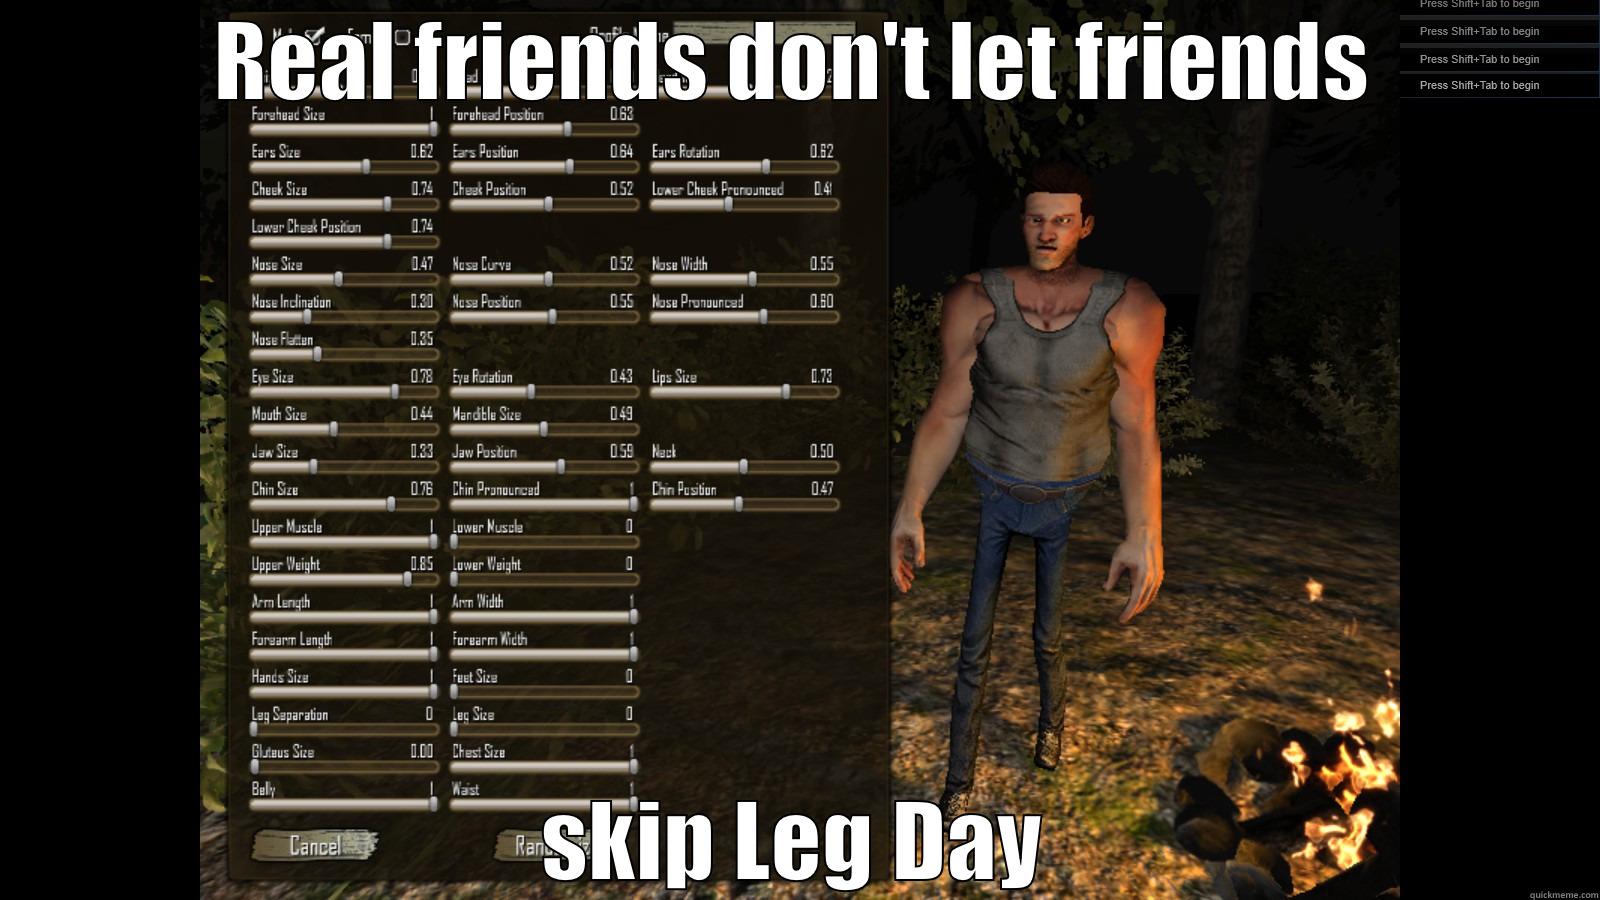 7 Days to Die memes - REAL FRIENDS DON'T LET FRIENDS SKIP LEG DAY Misc